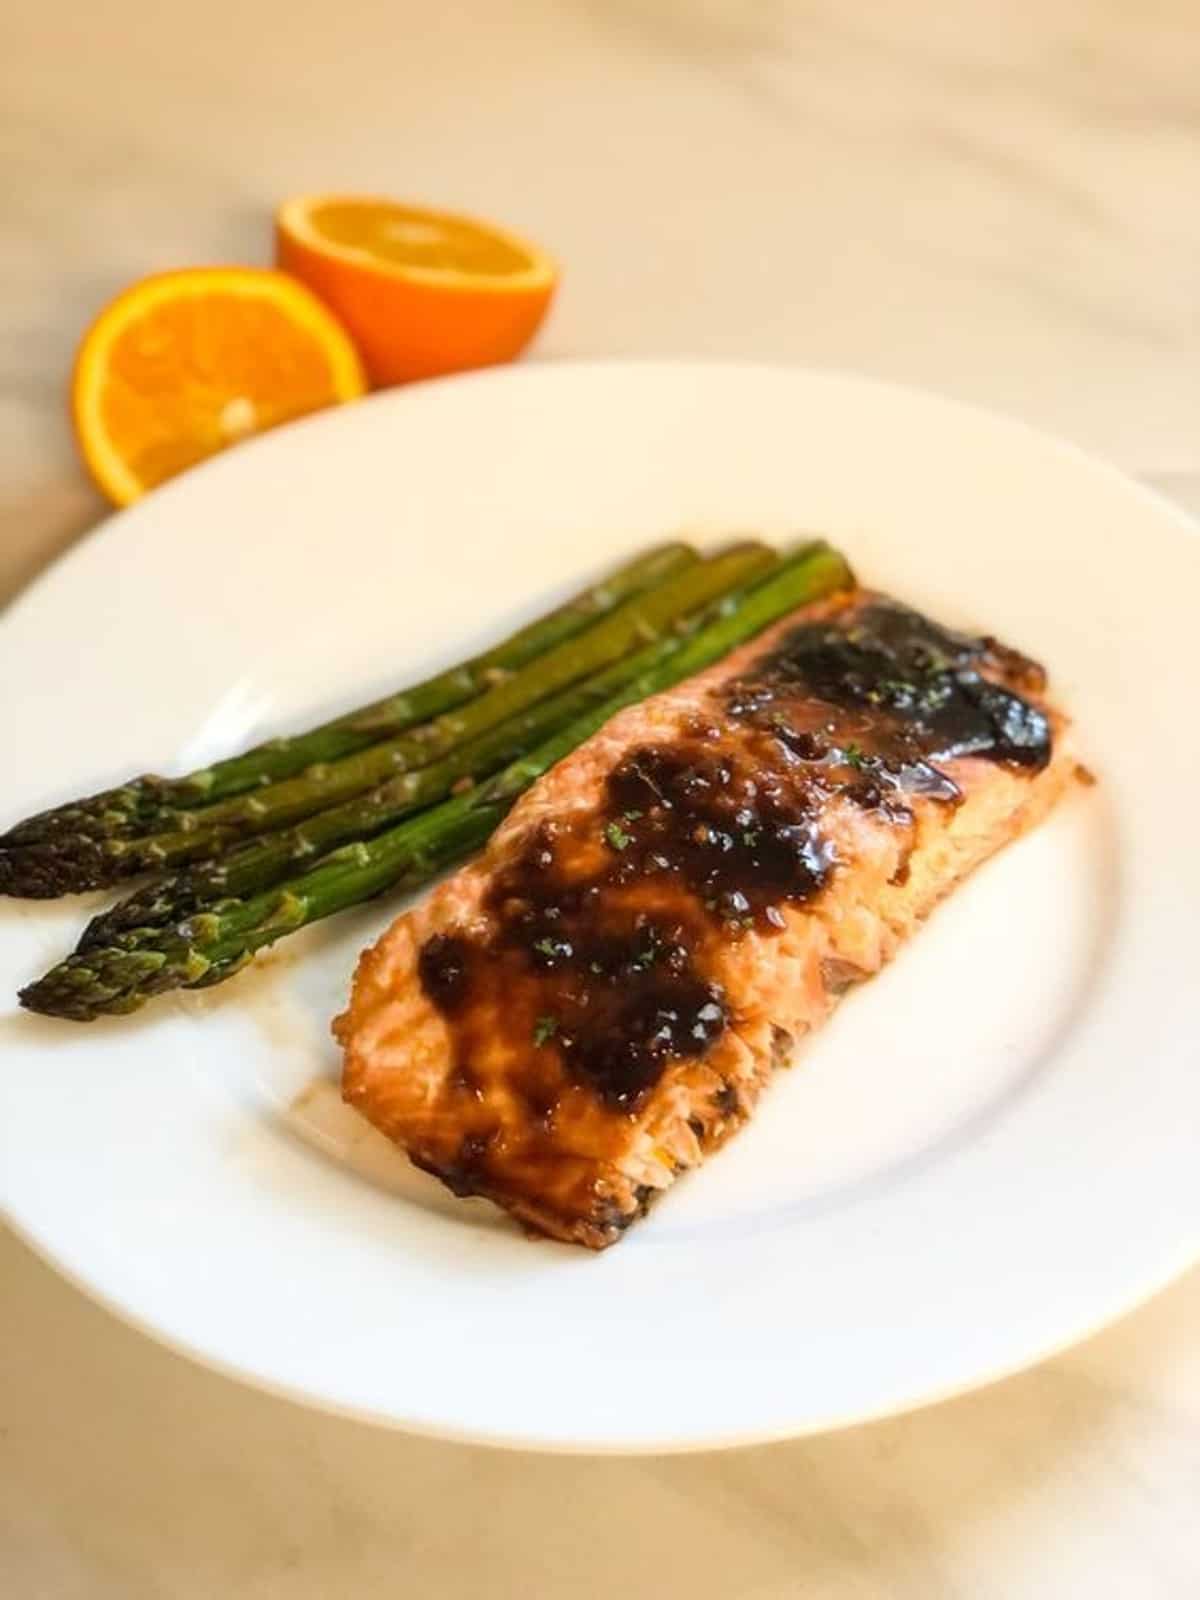 Glazed salmon and asparagus served on a white plate with an orange next to it. 